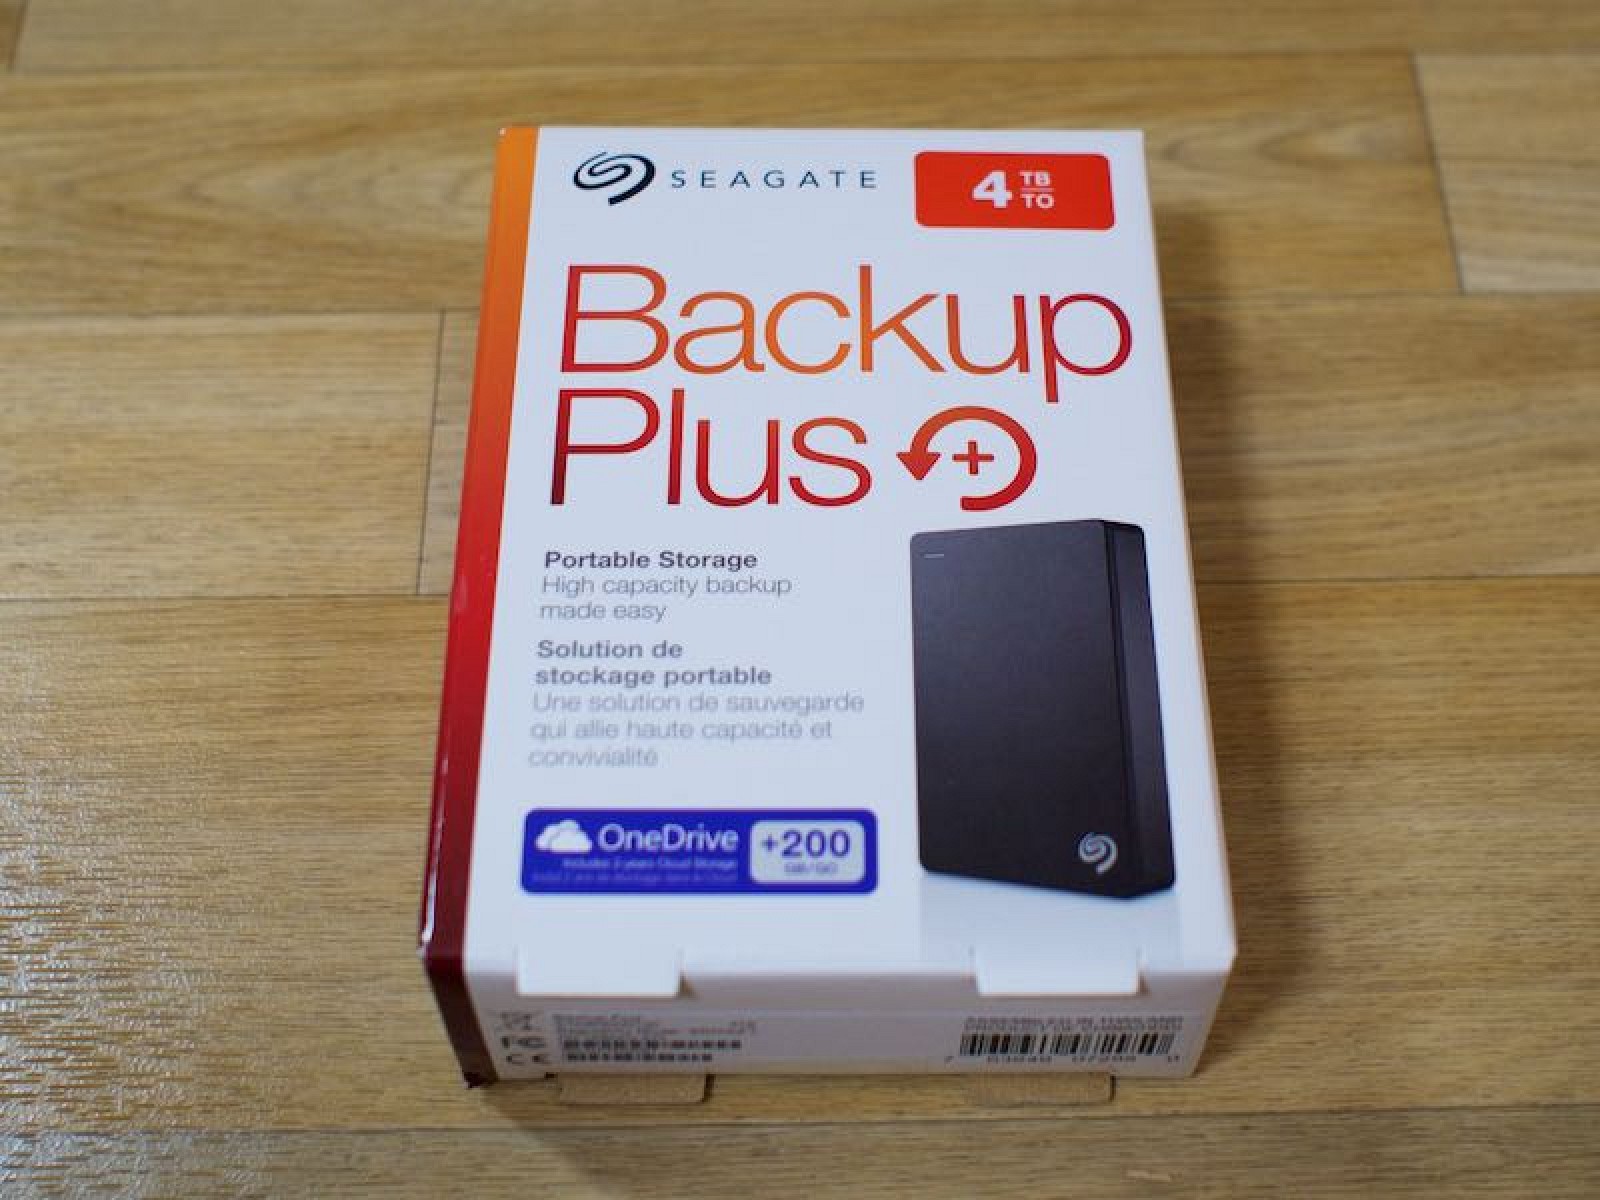 Seagate Review: Hands-On With the 4TB Backup Plus Portable Hard Drive